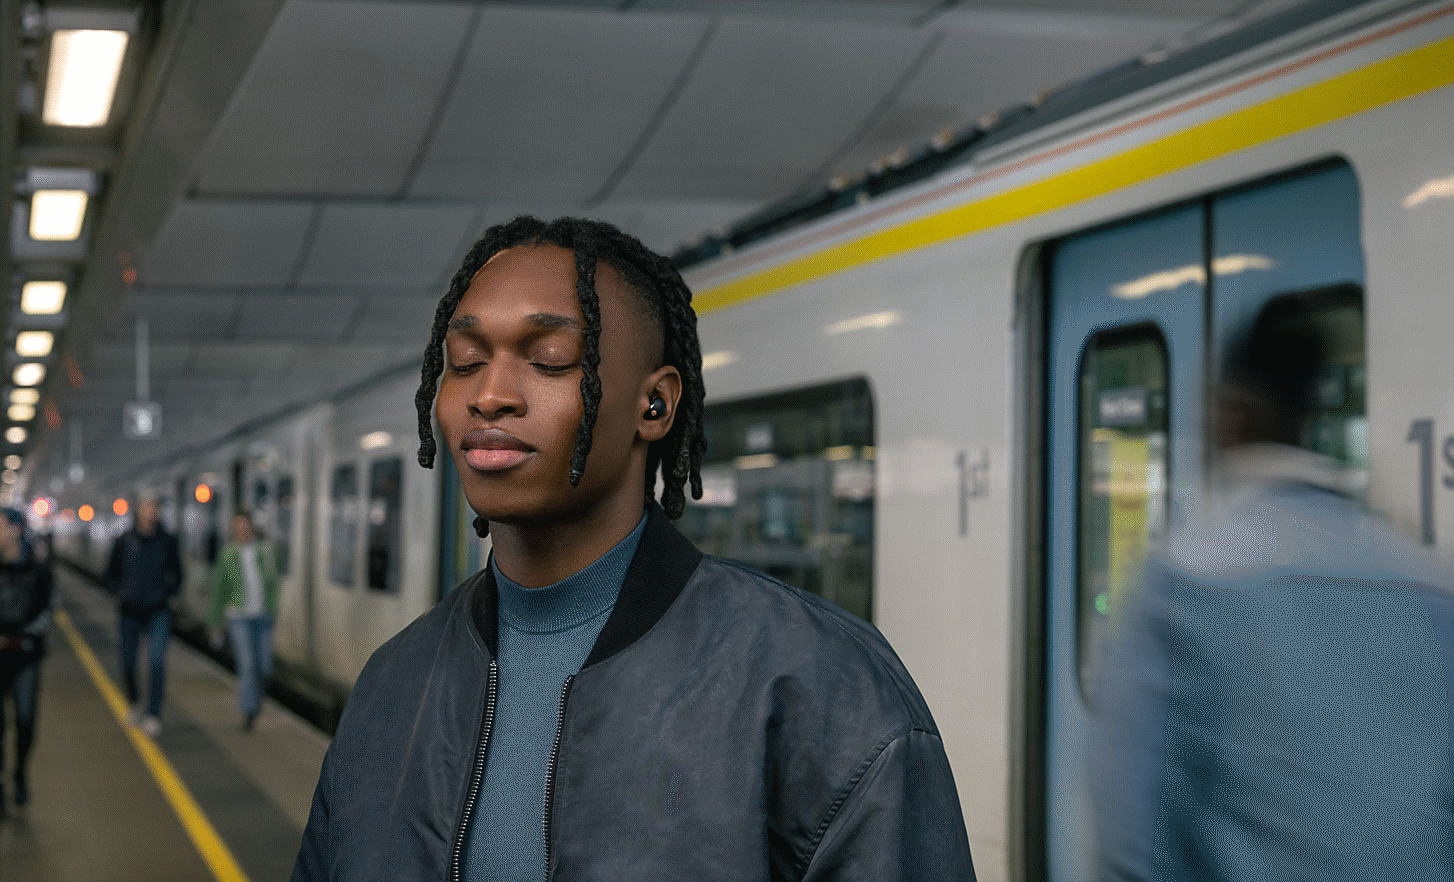  Image of a person with eyes closed, standing on a train platform wearing the WF-1000XM5 Headphone